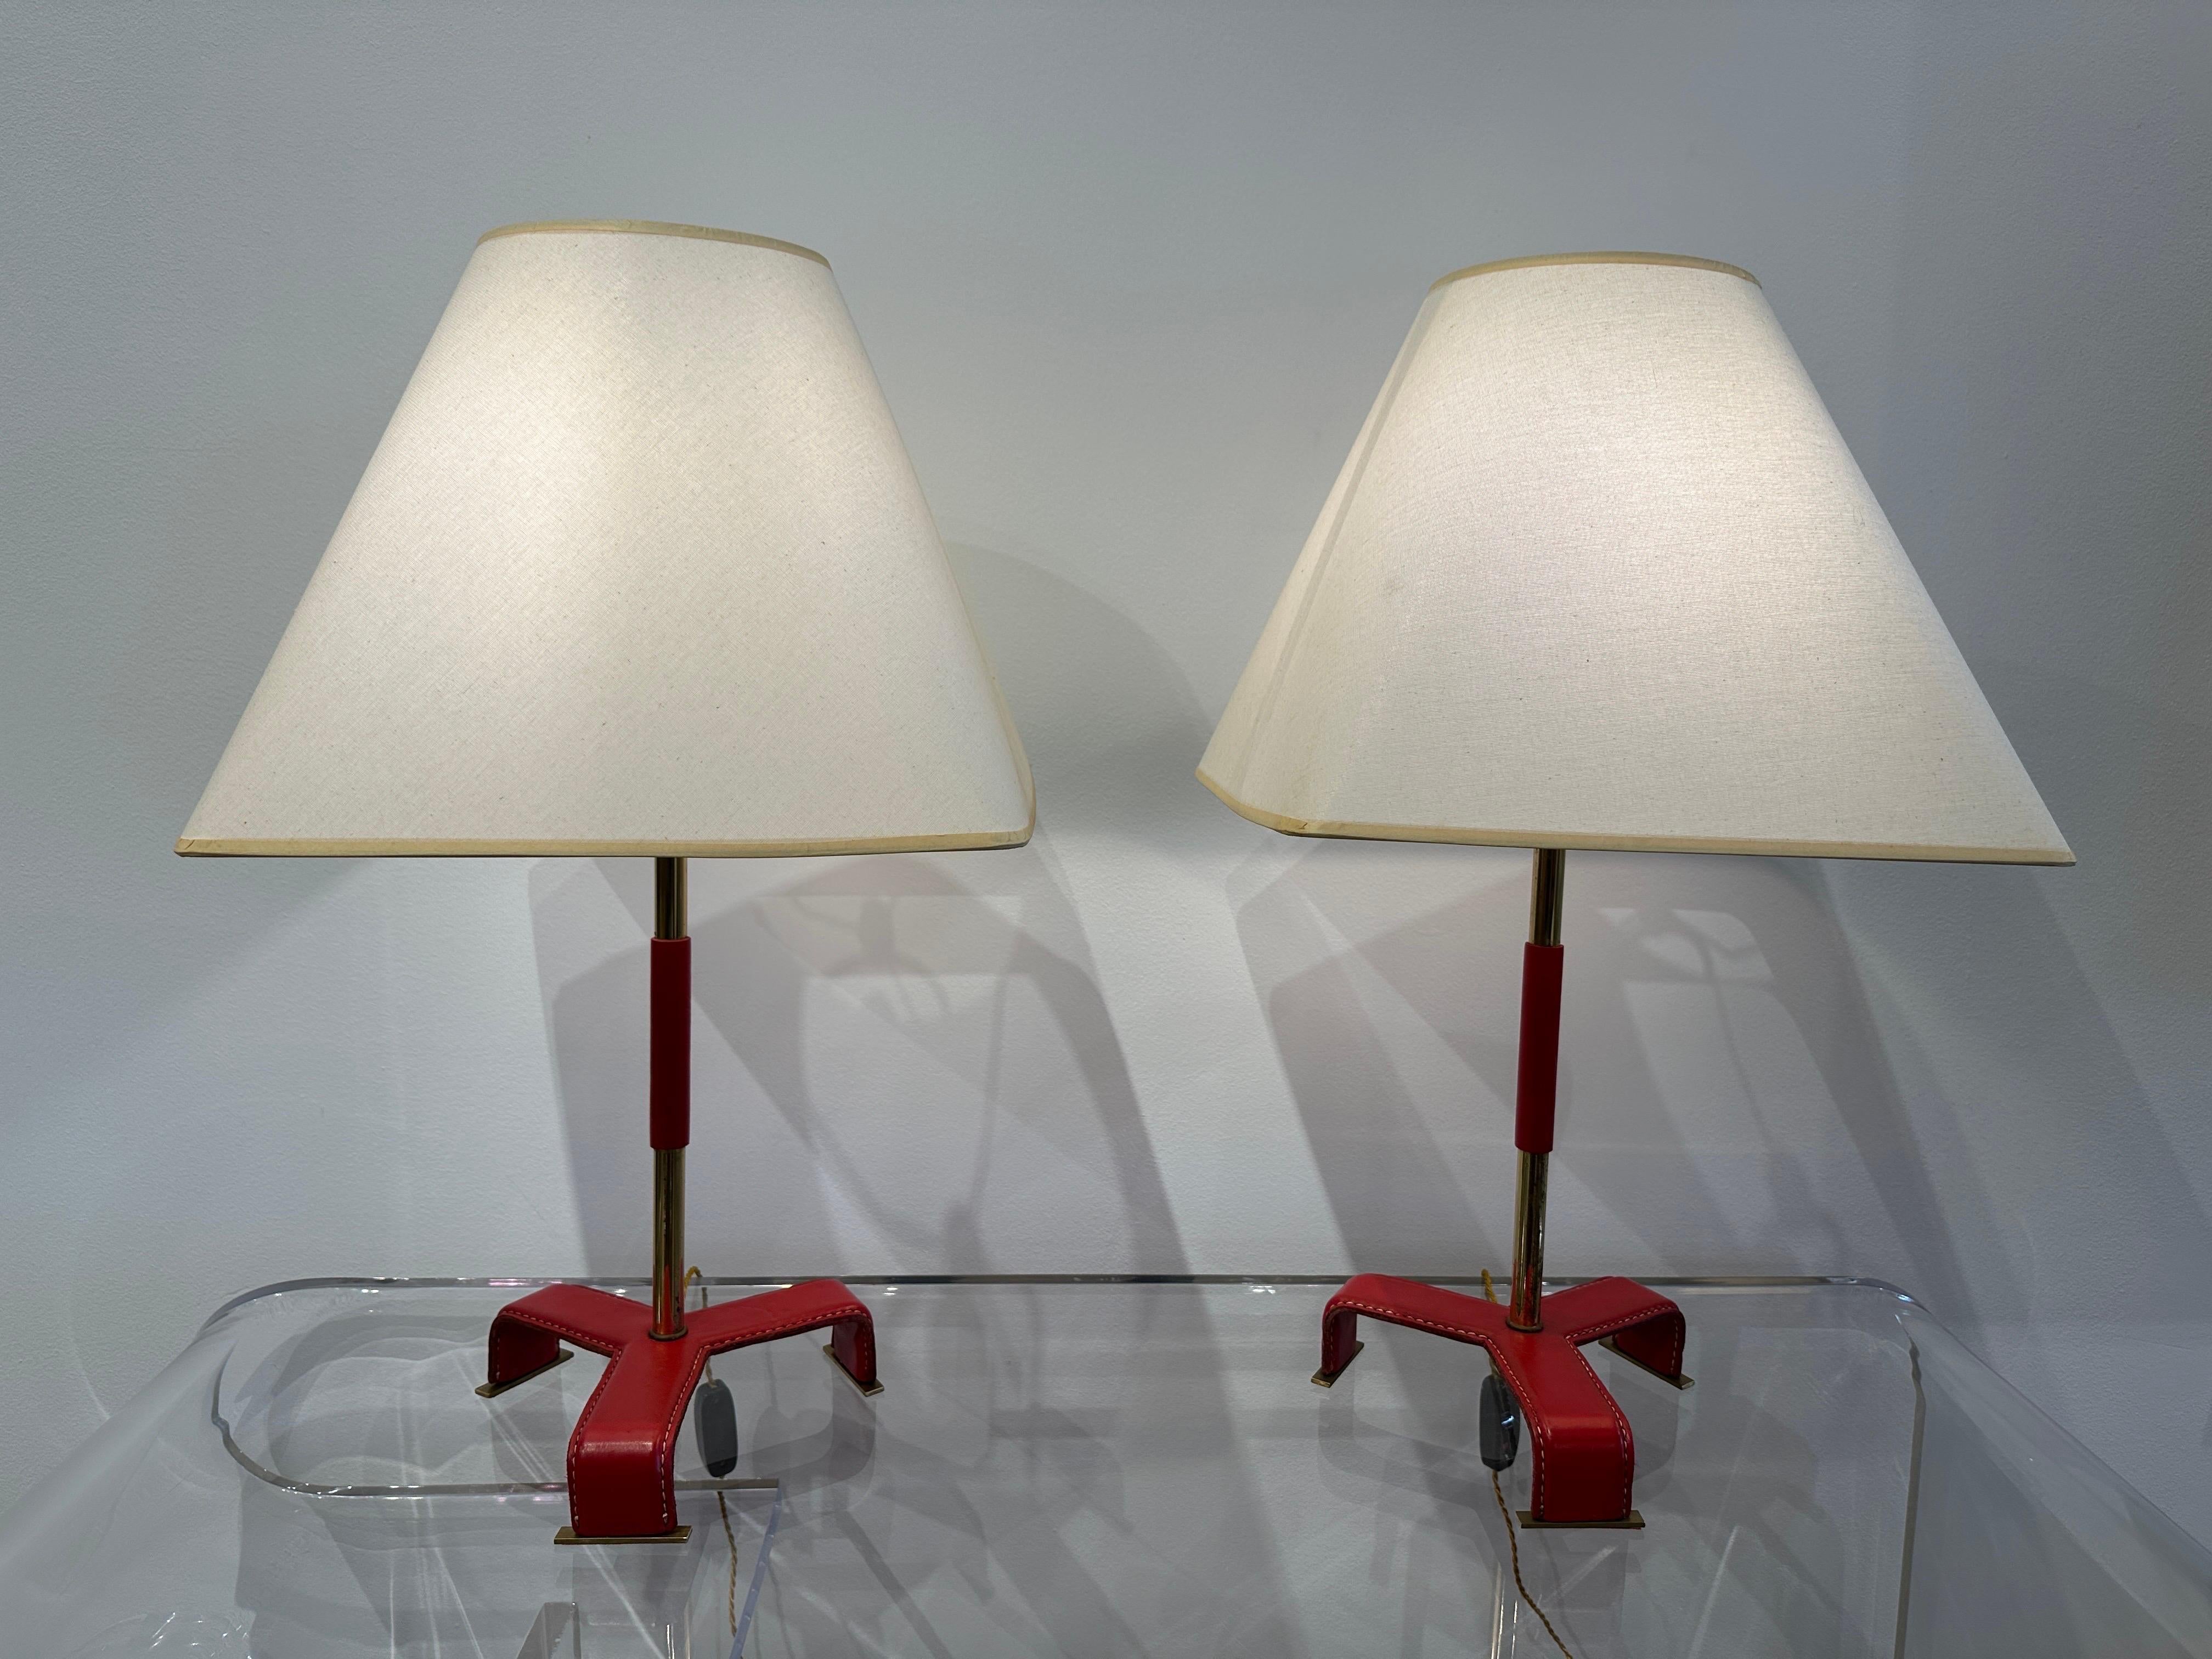 French Vintage Pair of Jacques Adnet style Red Stitched Leather Table Lamps, 1950's For Sale